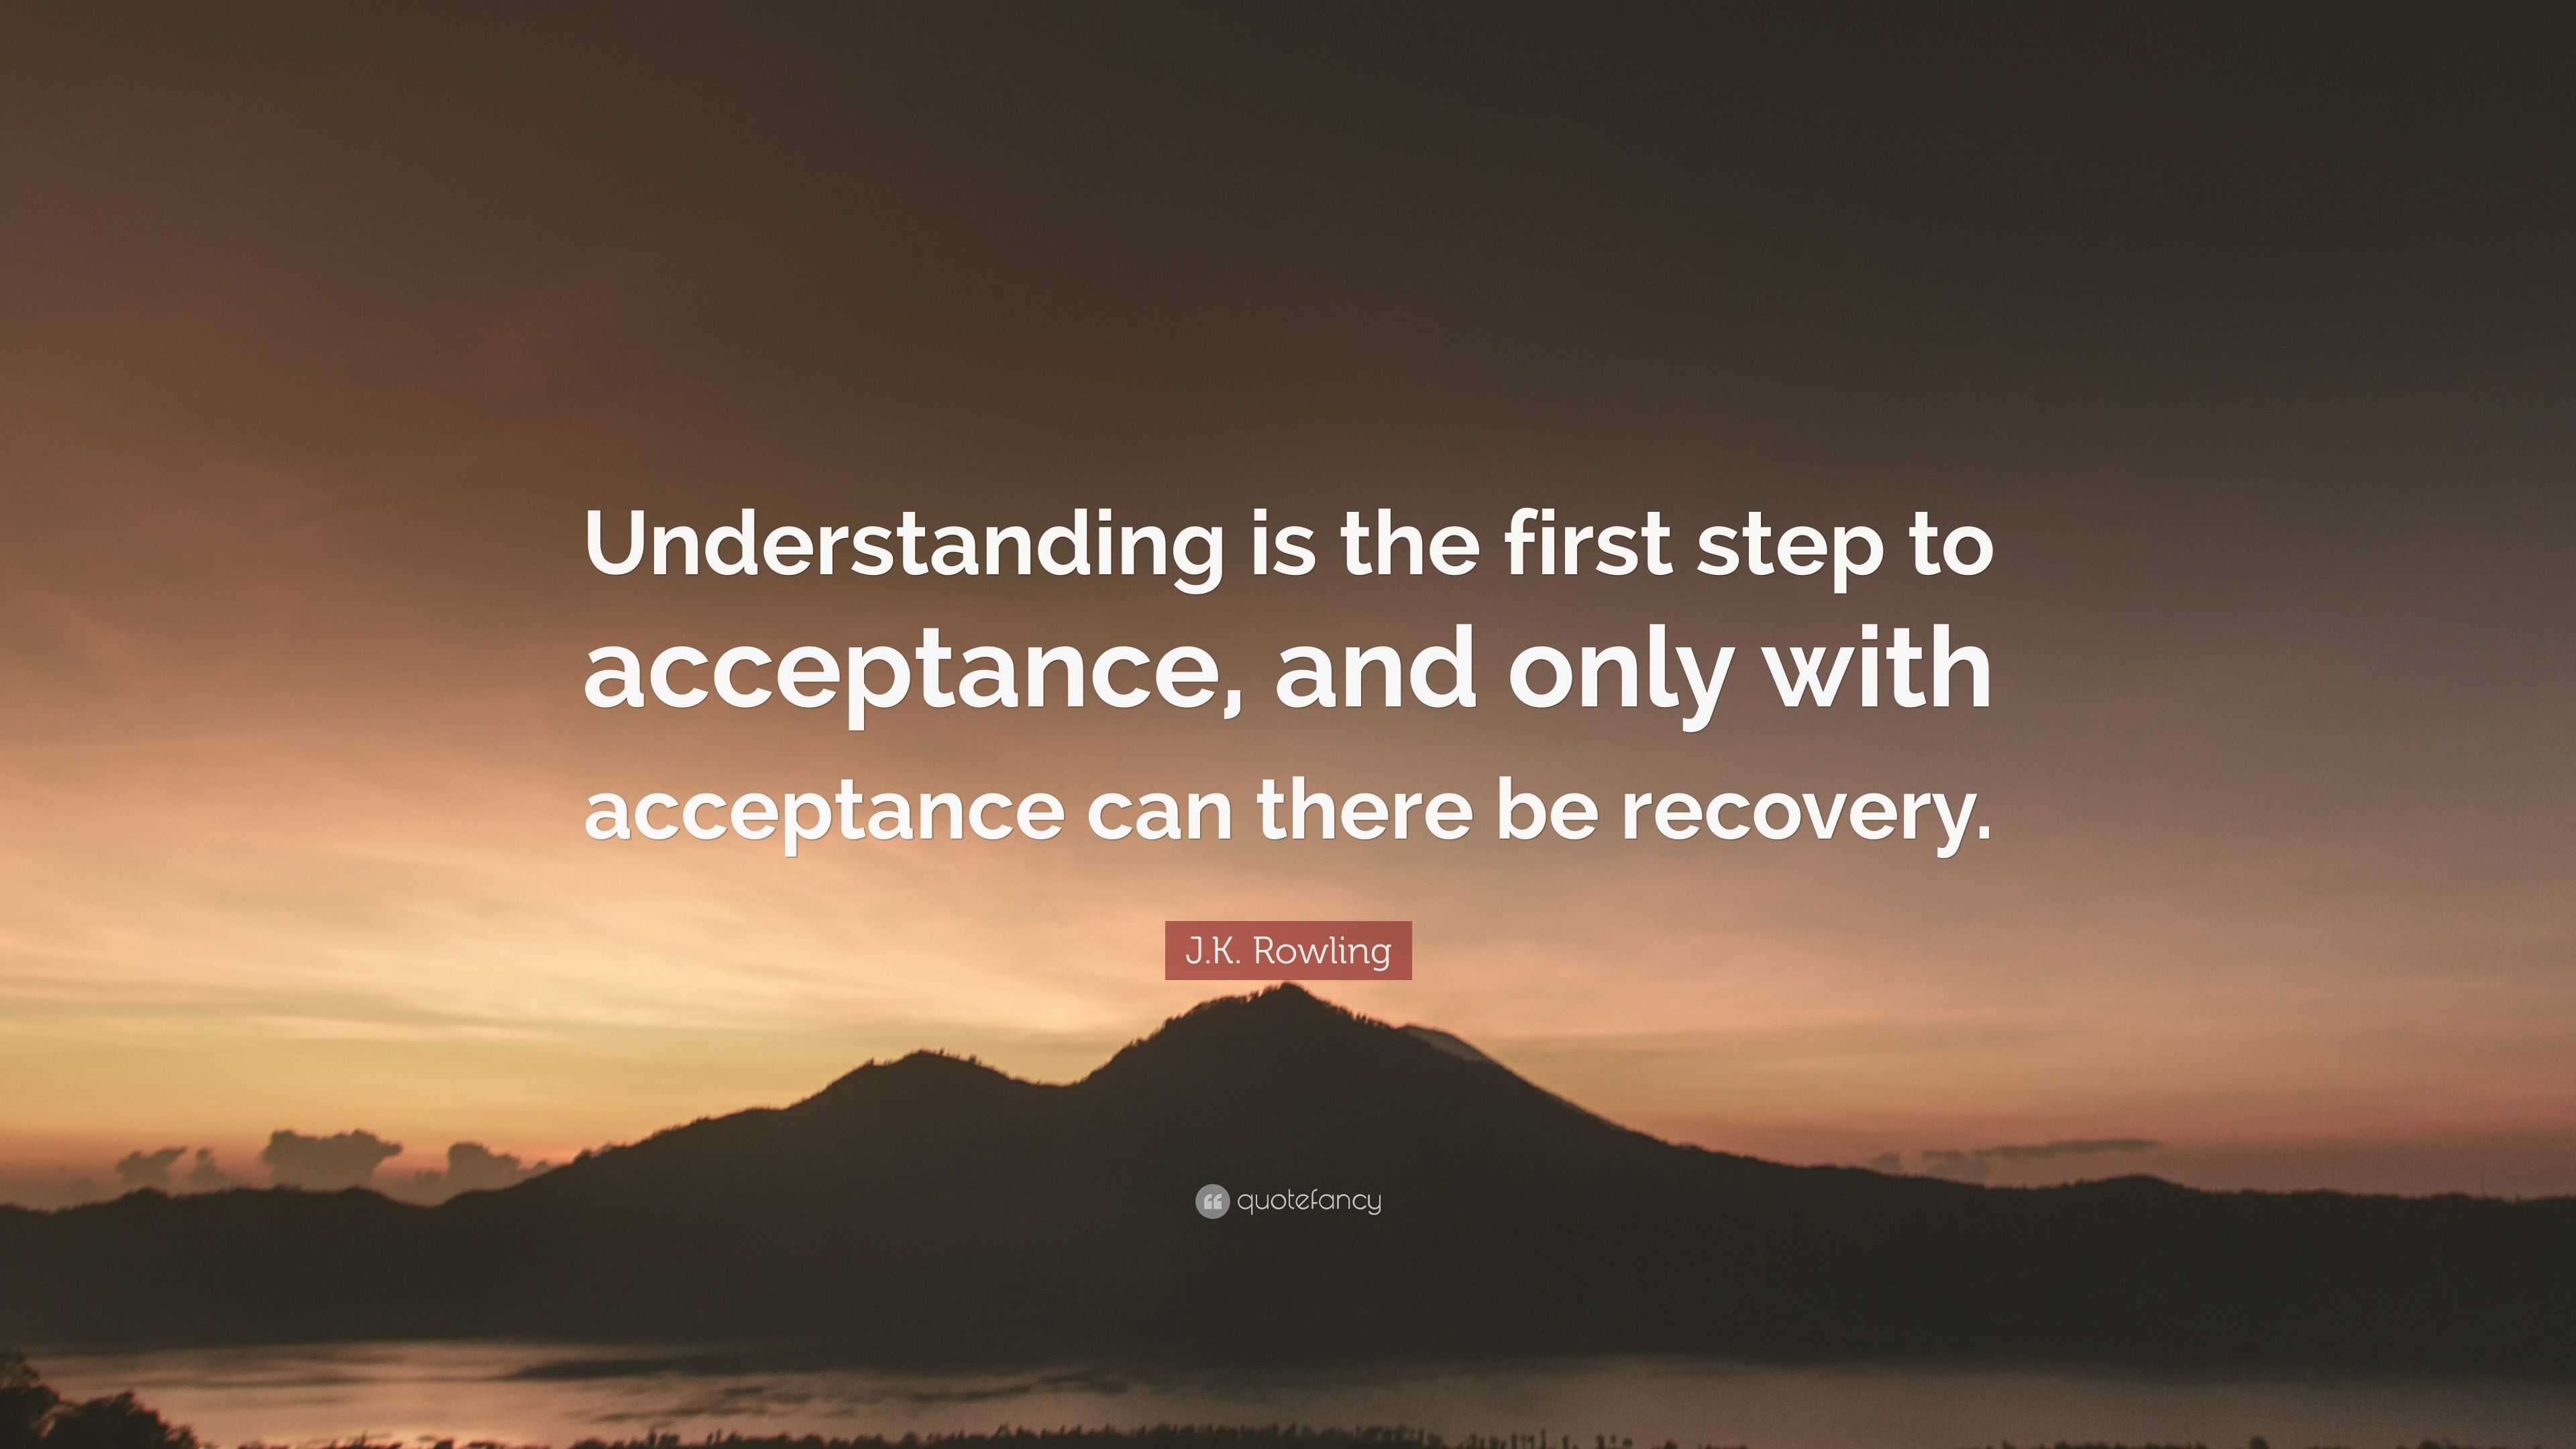 J.K. Rowling Quote: “Understanding is the first step to acceptance, and